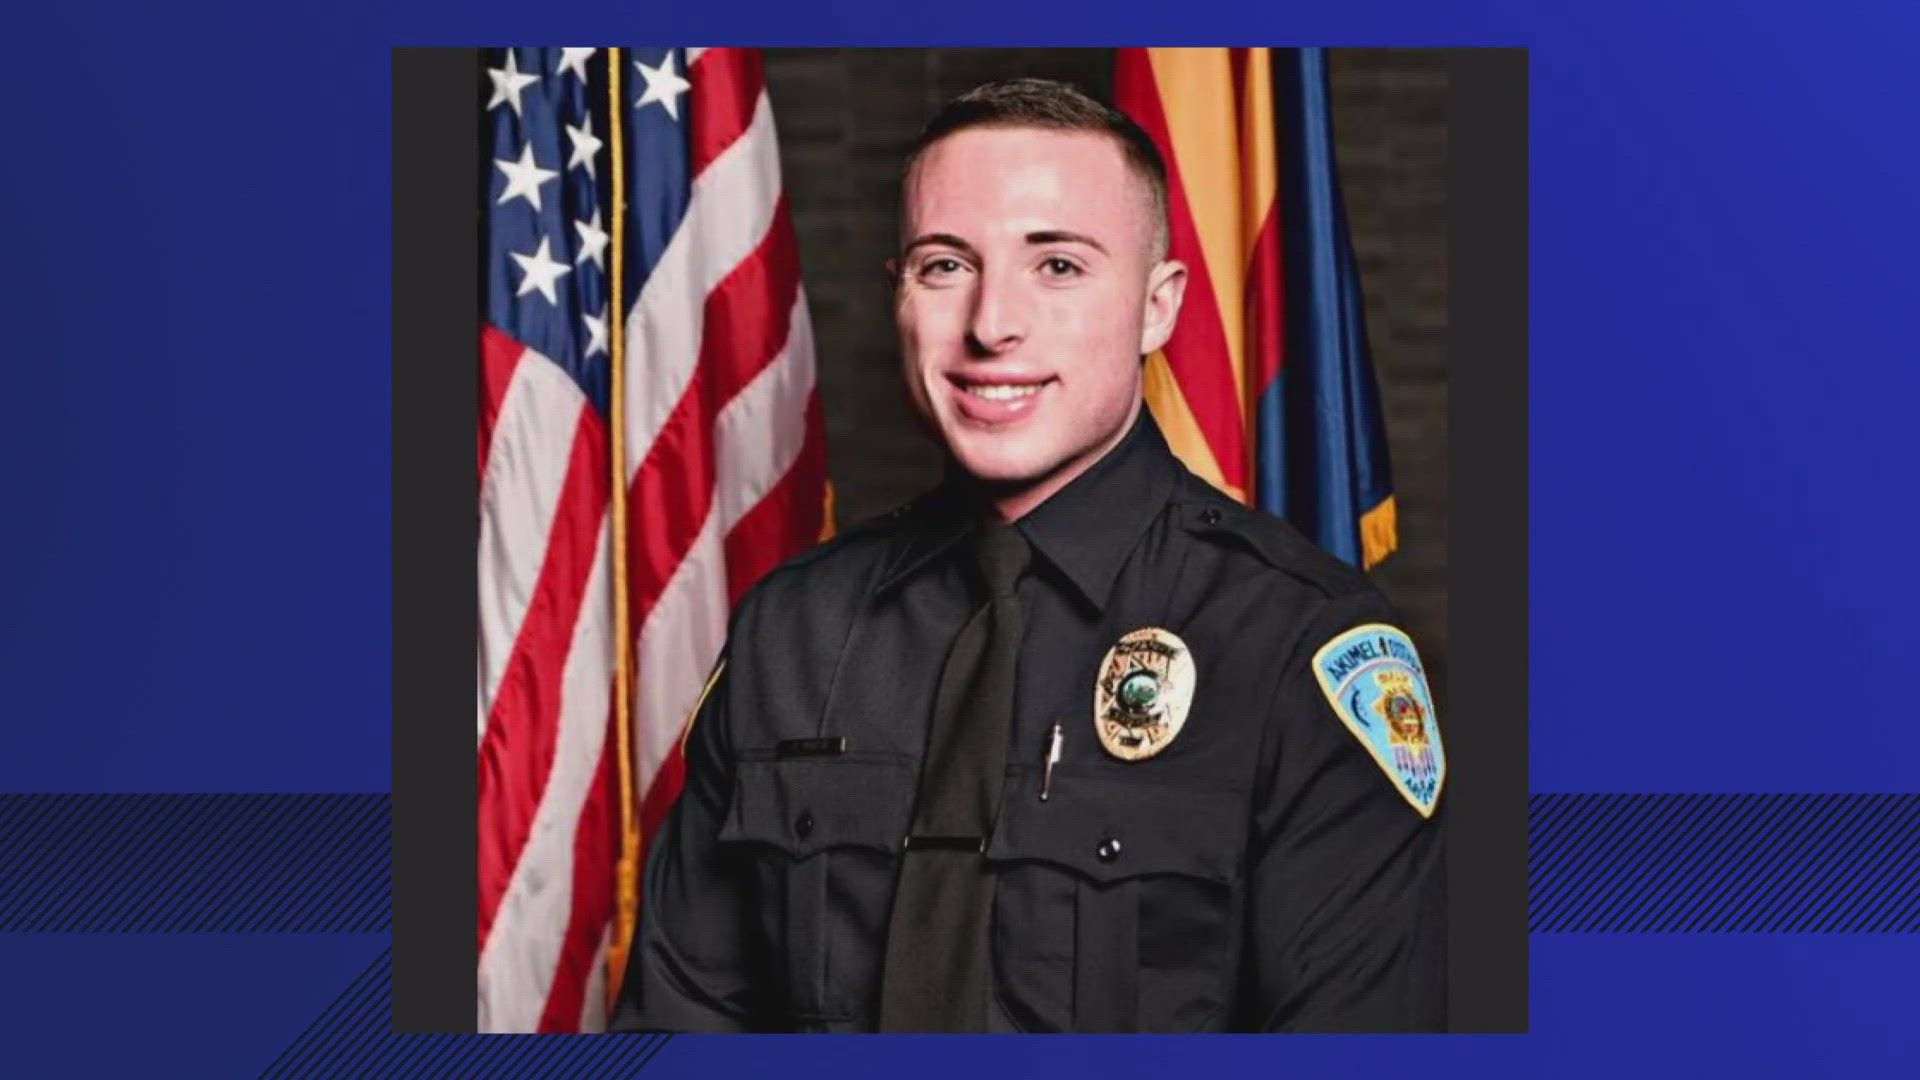 The officer, Joshua Briese, had been with the department for less than a year and was still in field training.